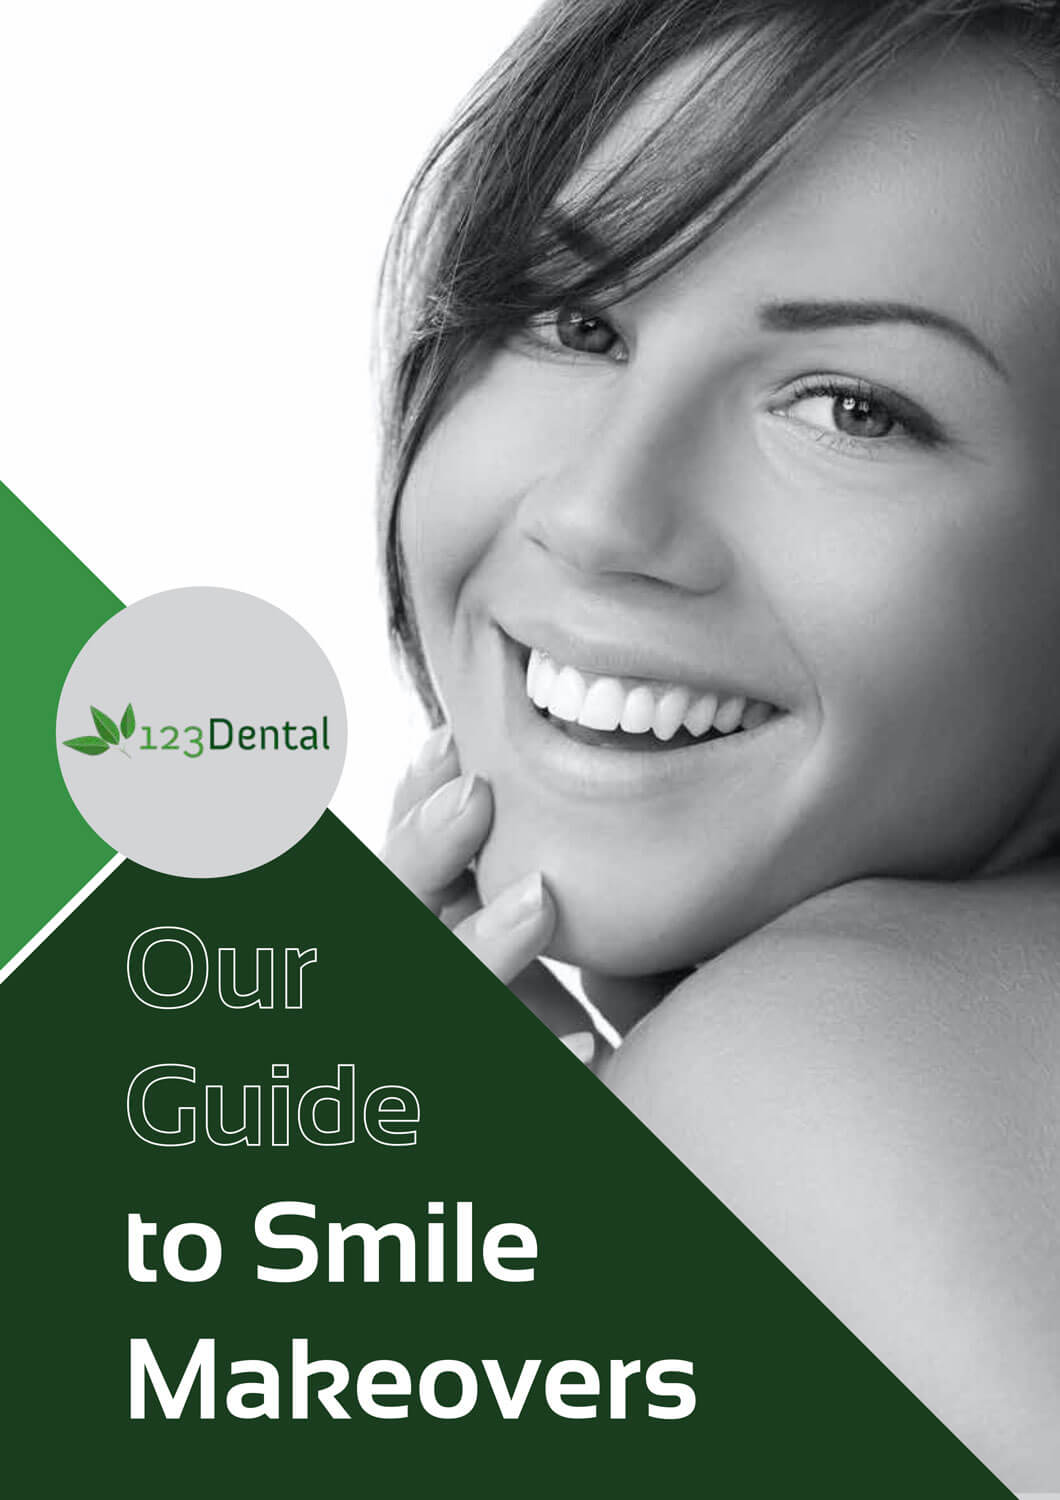 123Dental's Guide to Smile Makeovers